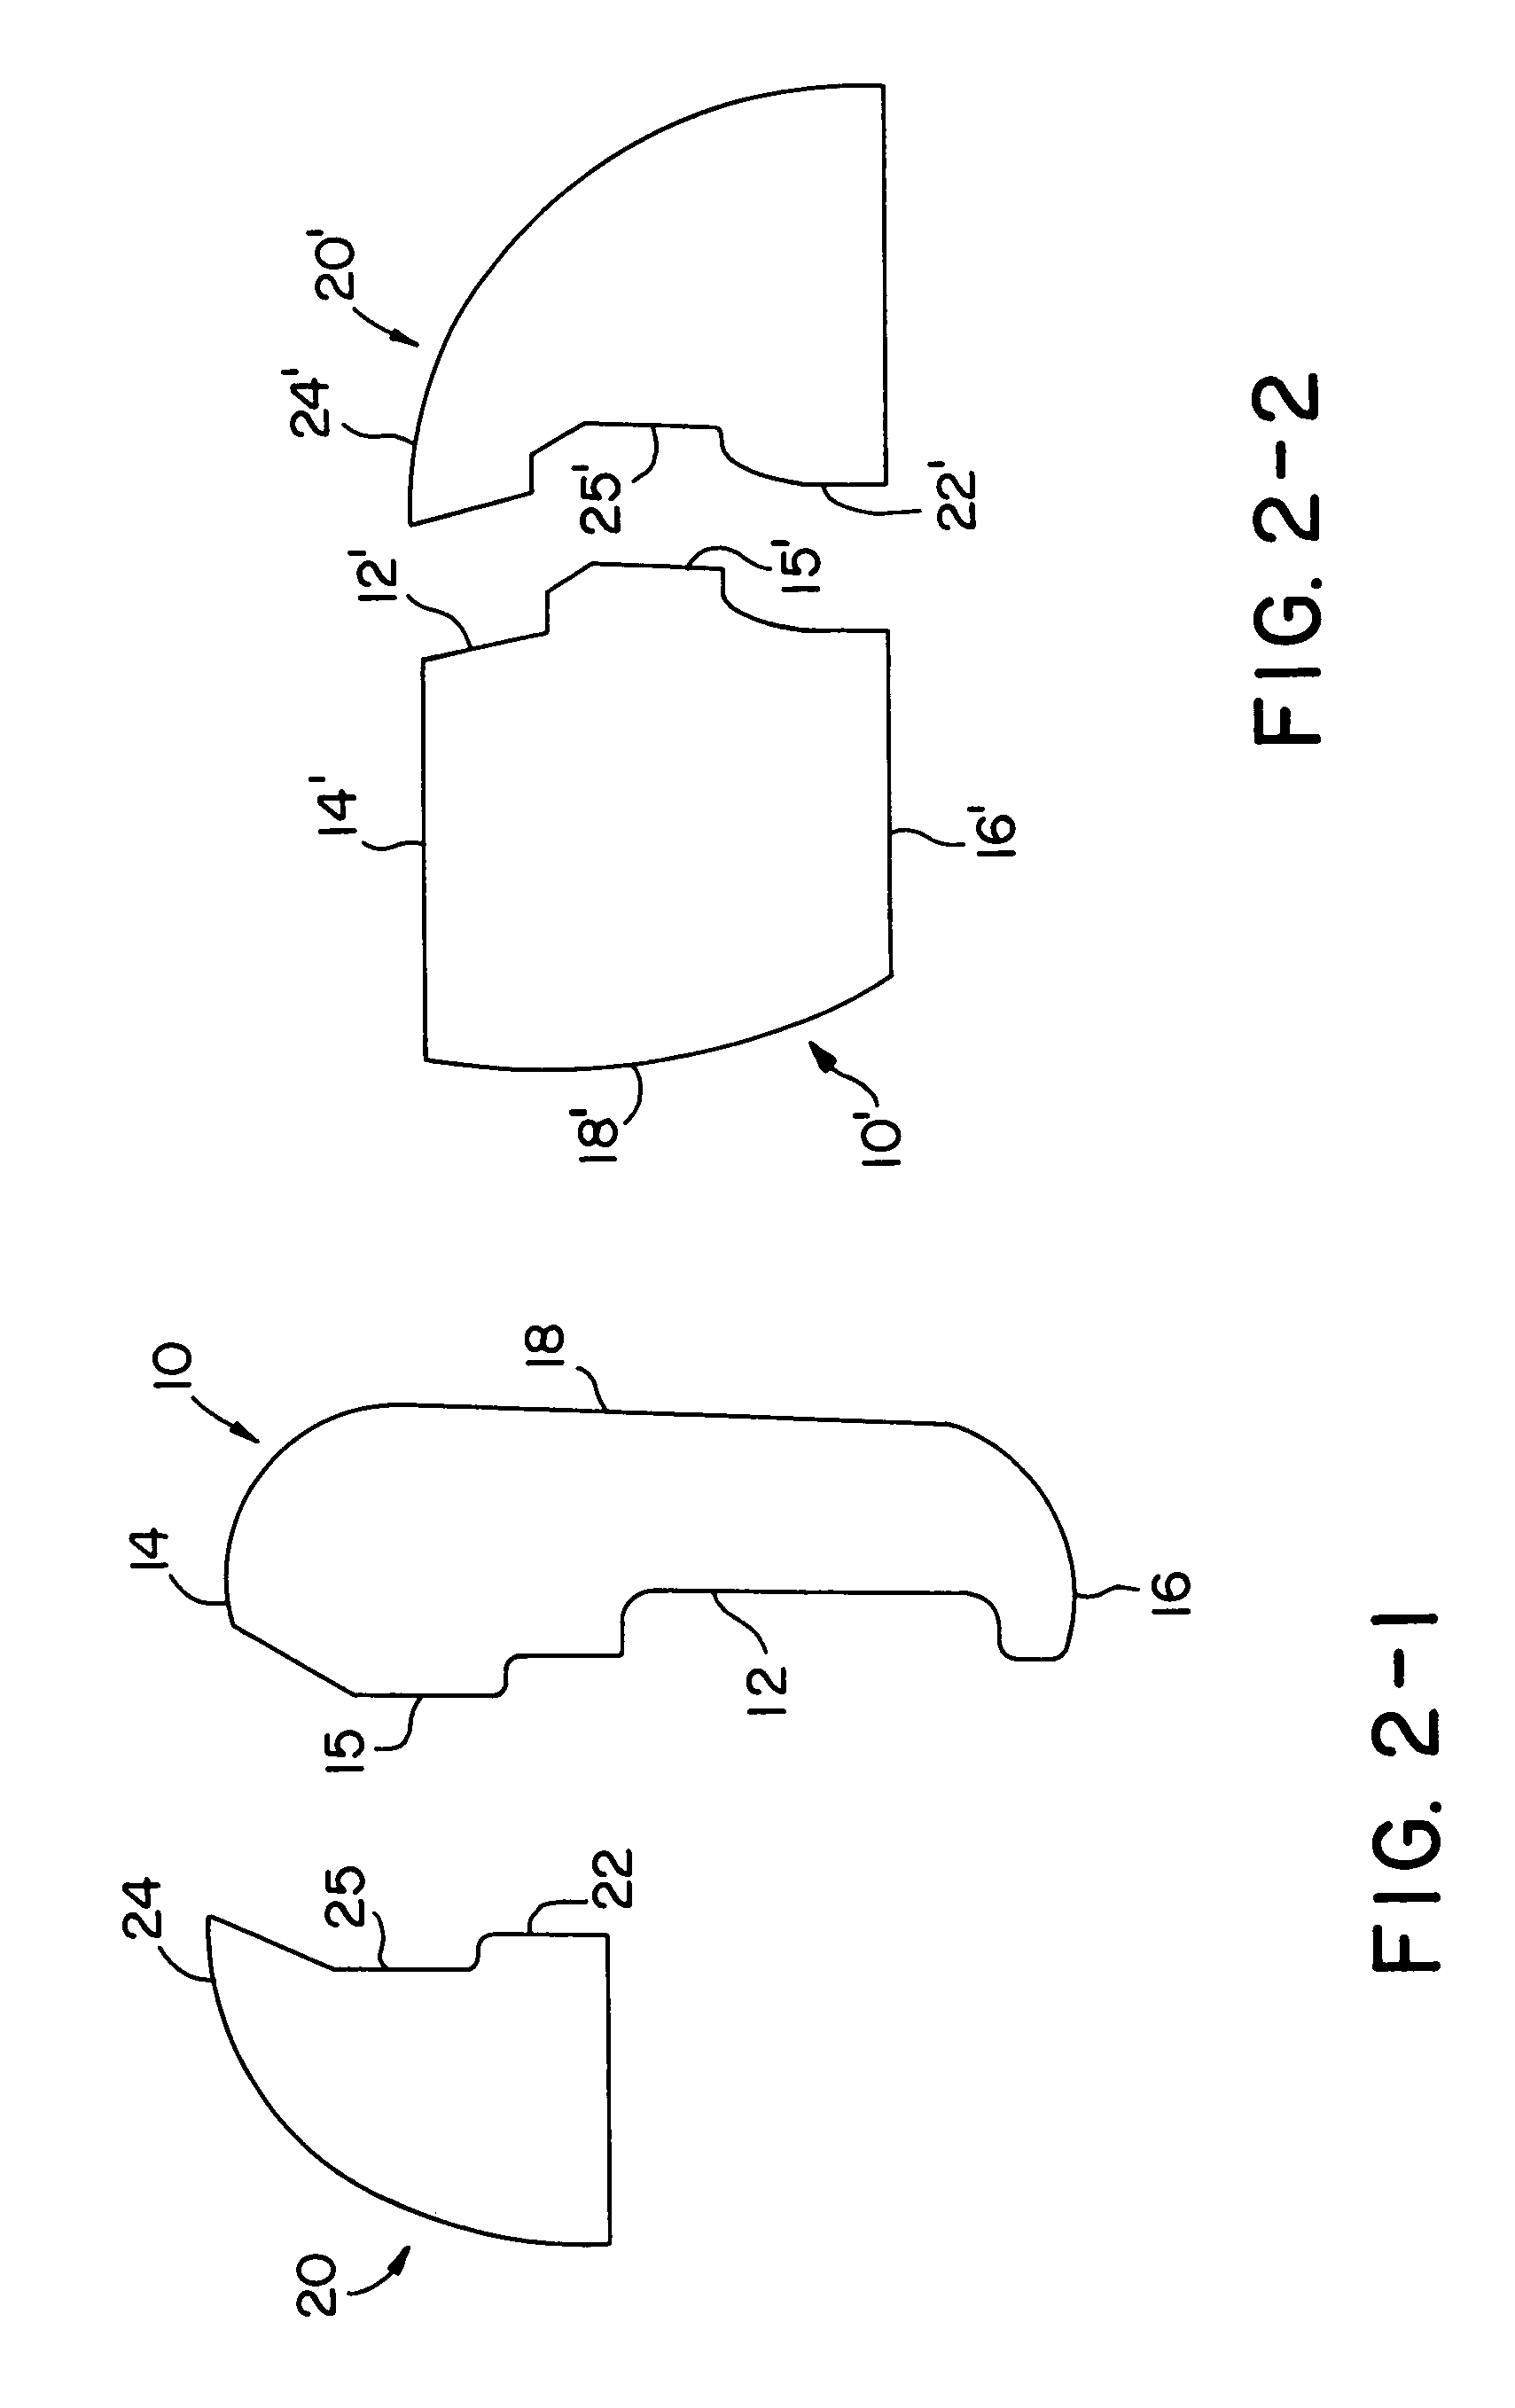 Automatic suture fixation apparatus and method for minimally invasive cardiac surgery